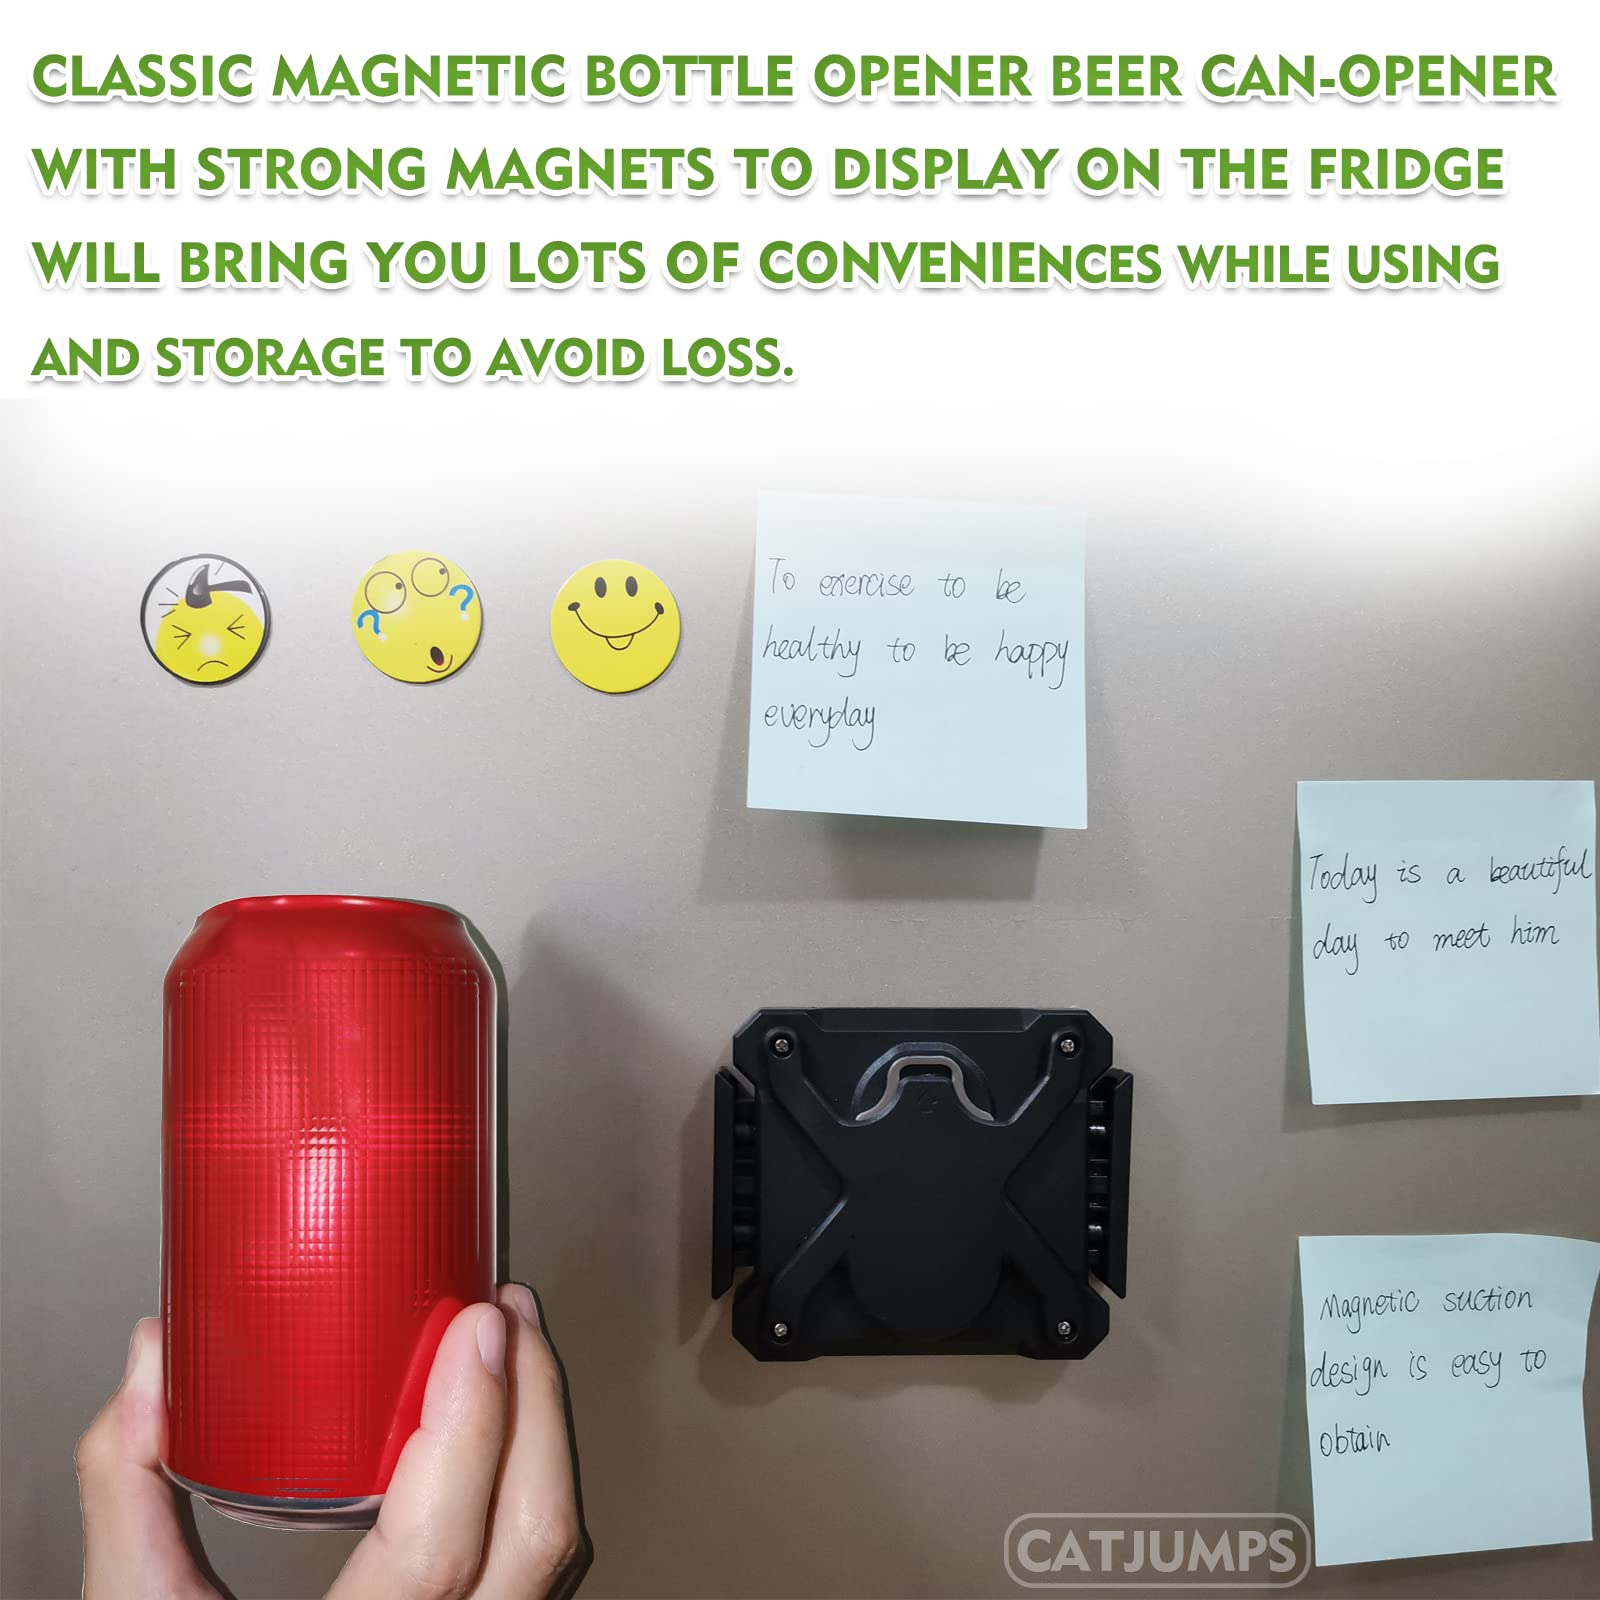 Beer Can Opener-2 In1 Soda Can Opener Bottle Opener, Pop Can Top Remover Opener, Manual No Sharp Edge Can Opener Smooth Edge with Reuse Drink Straw